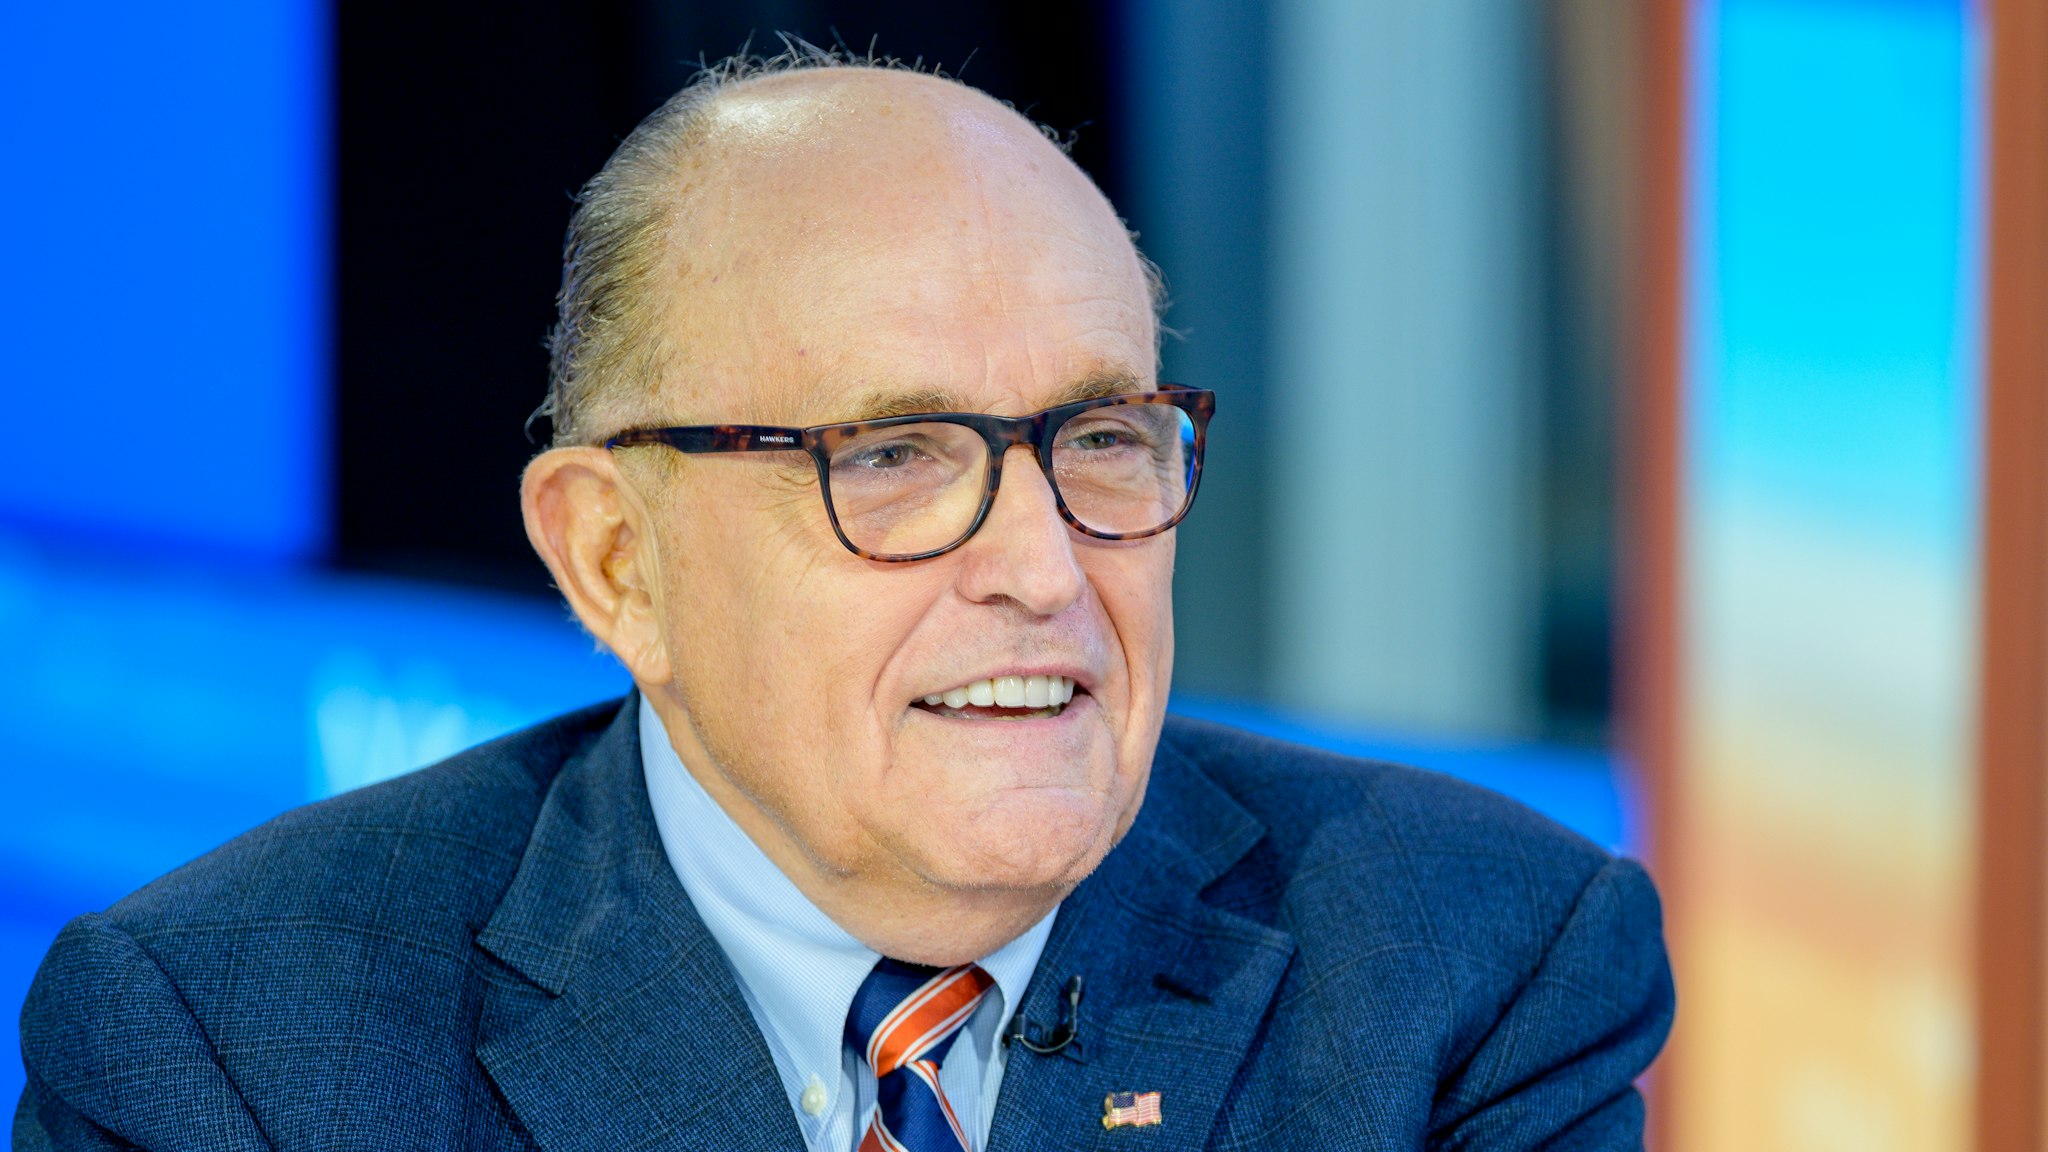 NEW YORK, NEW YORK - SEPTEMBER 23: Former New York City Mayor and attorney to President Donald Trump Rudy Giuliani visits "Mornings With Maria" with anchor Maria Bartiromo at Fox Business Network Studios on September 23, 2019 in New York City. (Photo by Roy Rochlin/Getty Images)